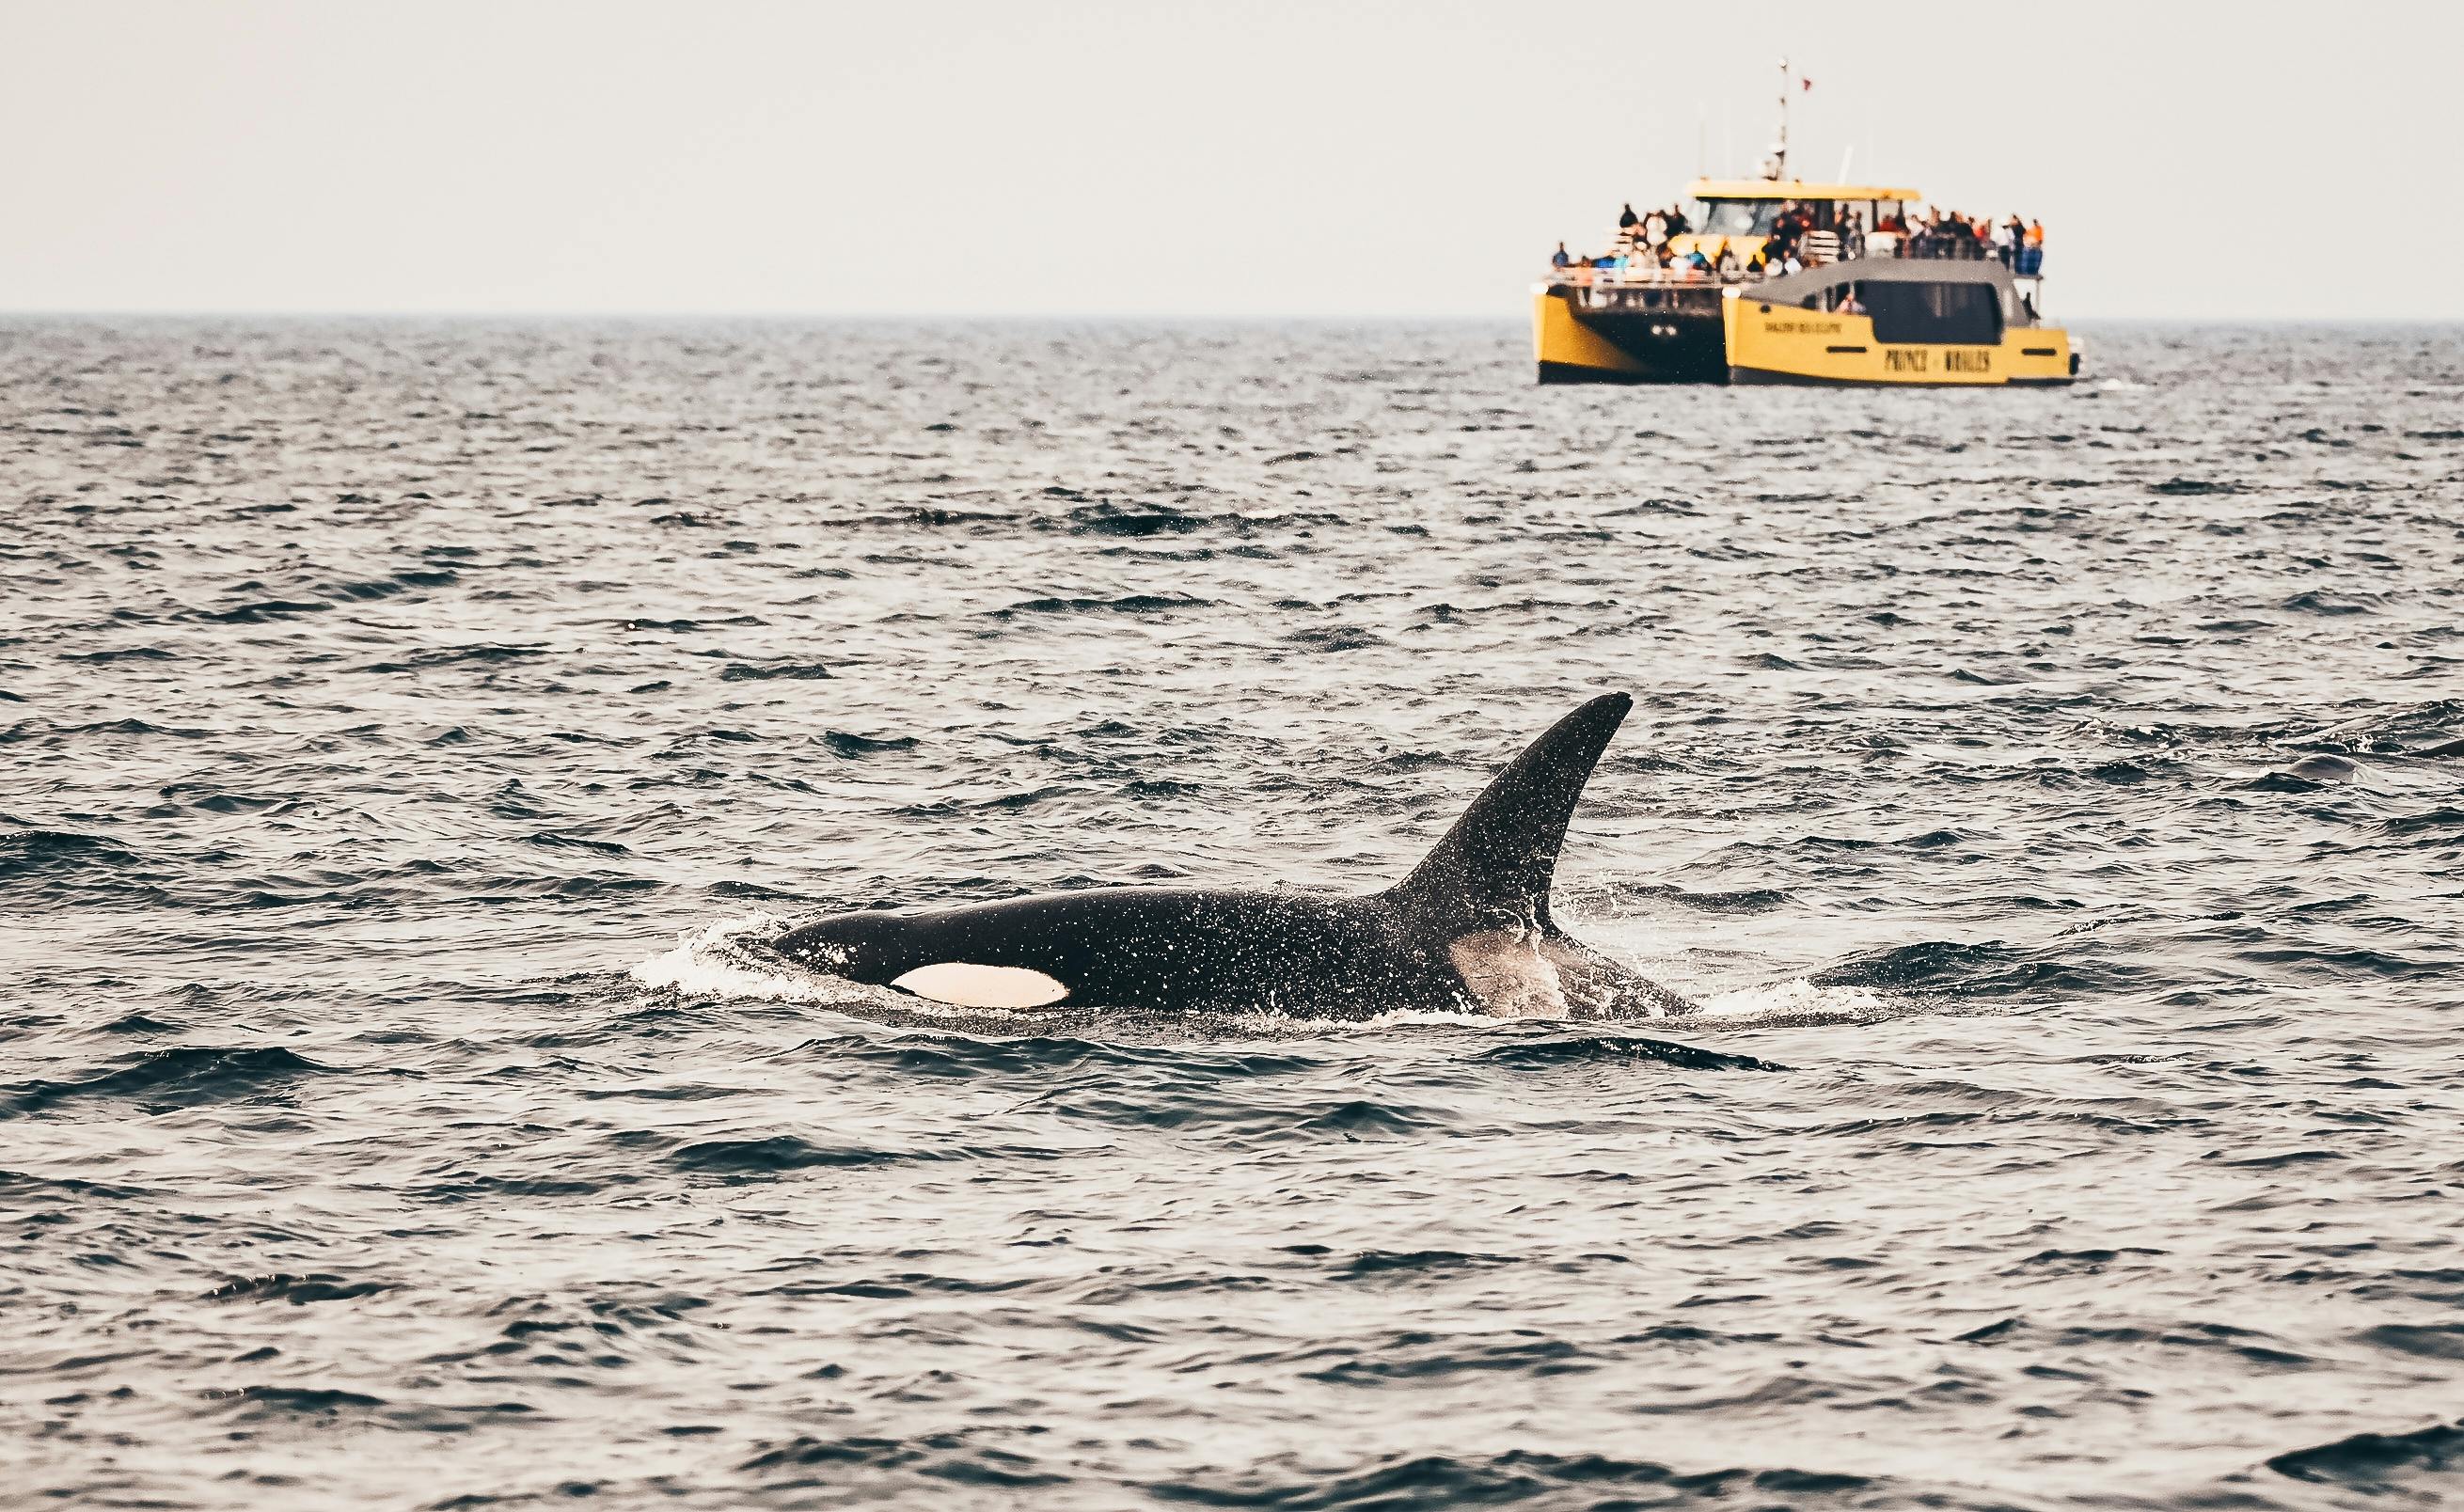 Half-day whale watching adventure from Victoria